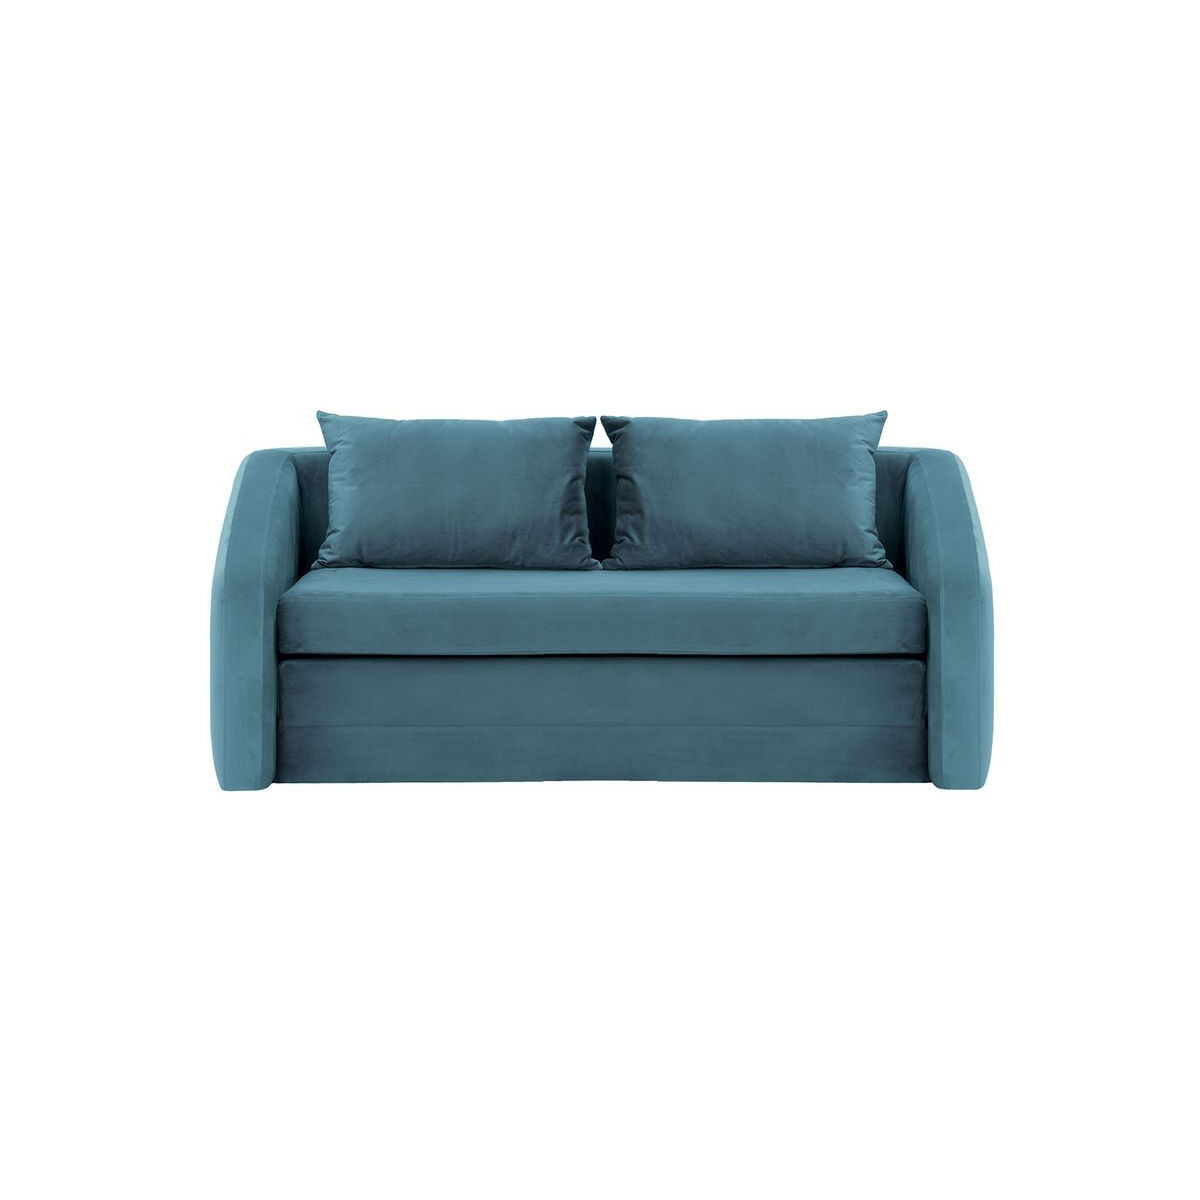 Alma 3 Seater Sofa Bed, dirty blue - image 1